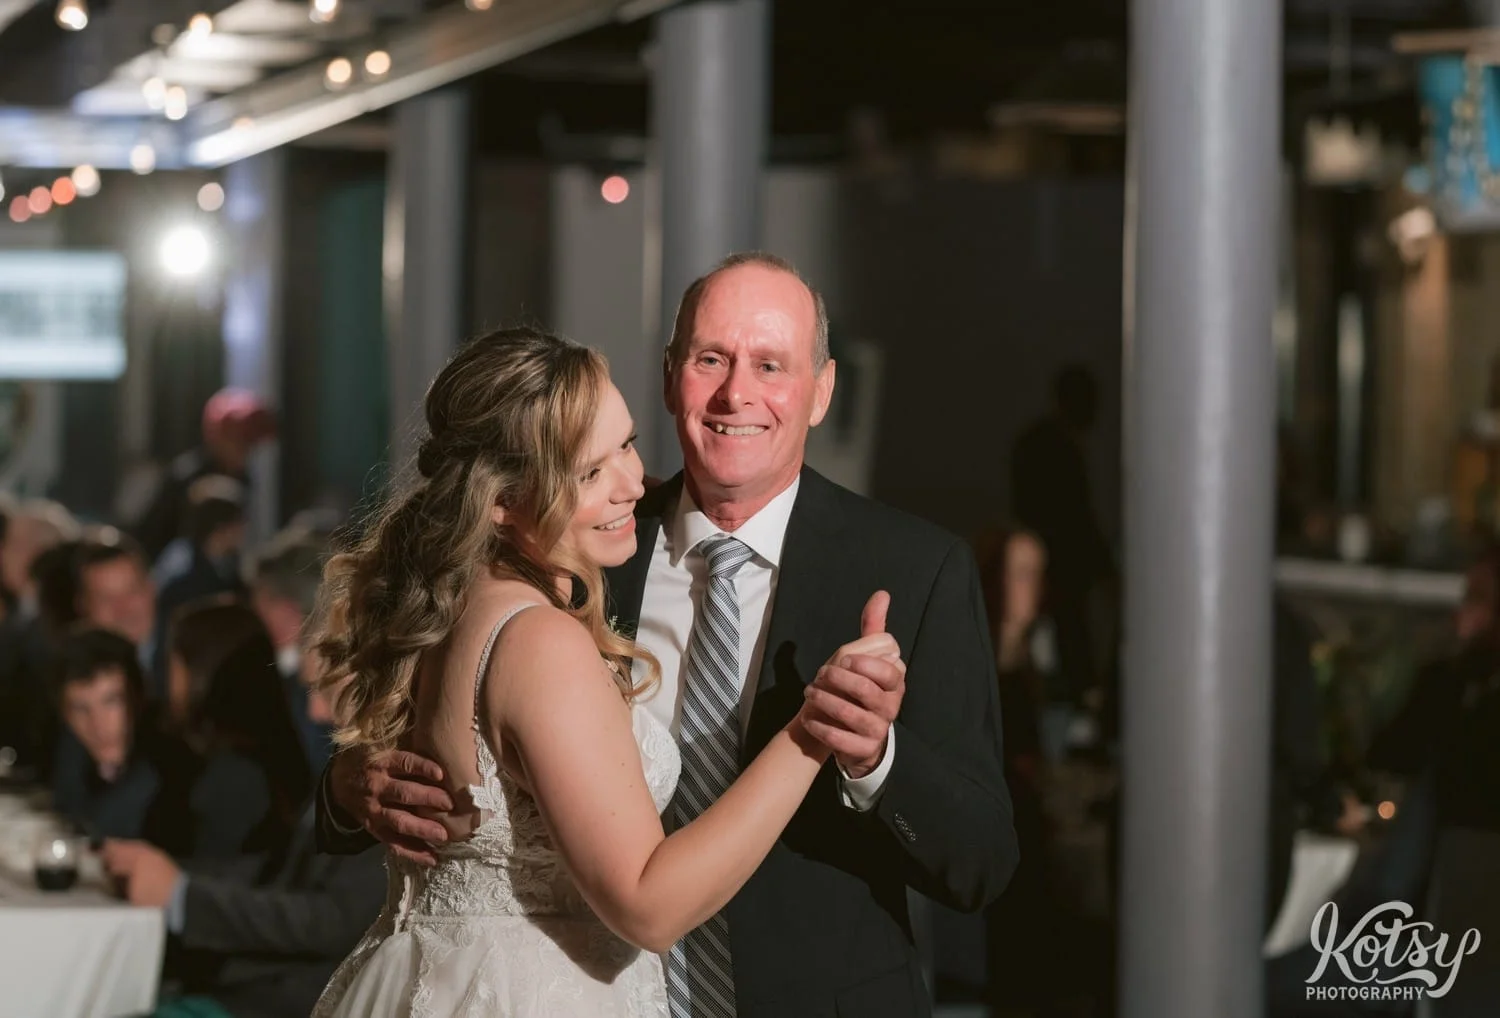 A man in a black suit smiles at the camera as he dances with his daughter in a white wedding gown during Second Floor Events wedding reception in Toronto, Canada.